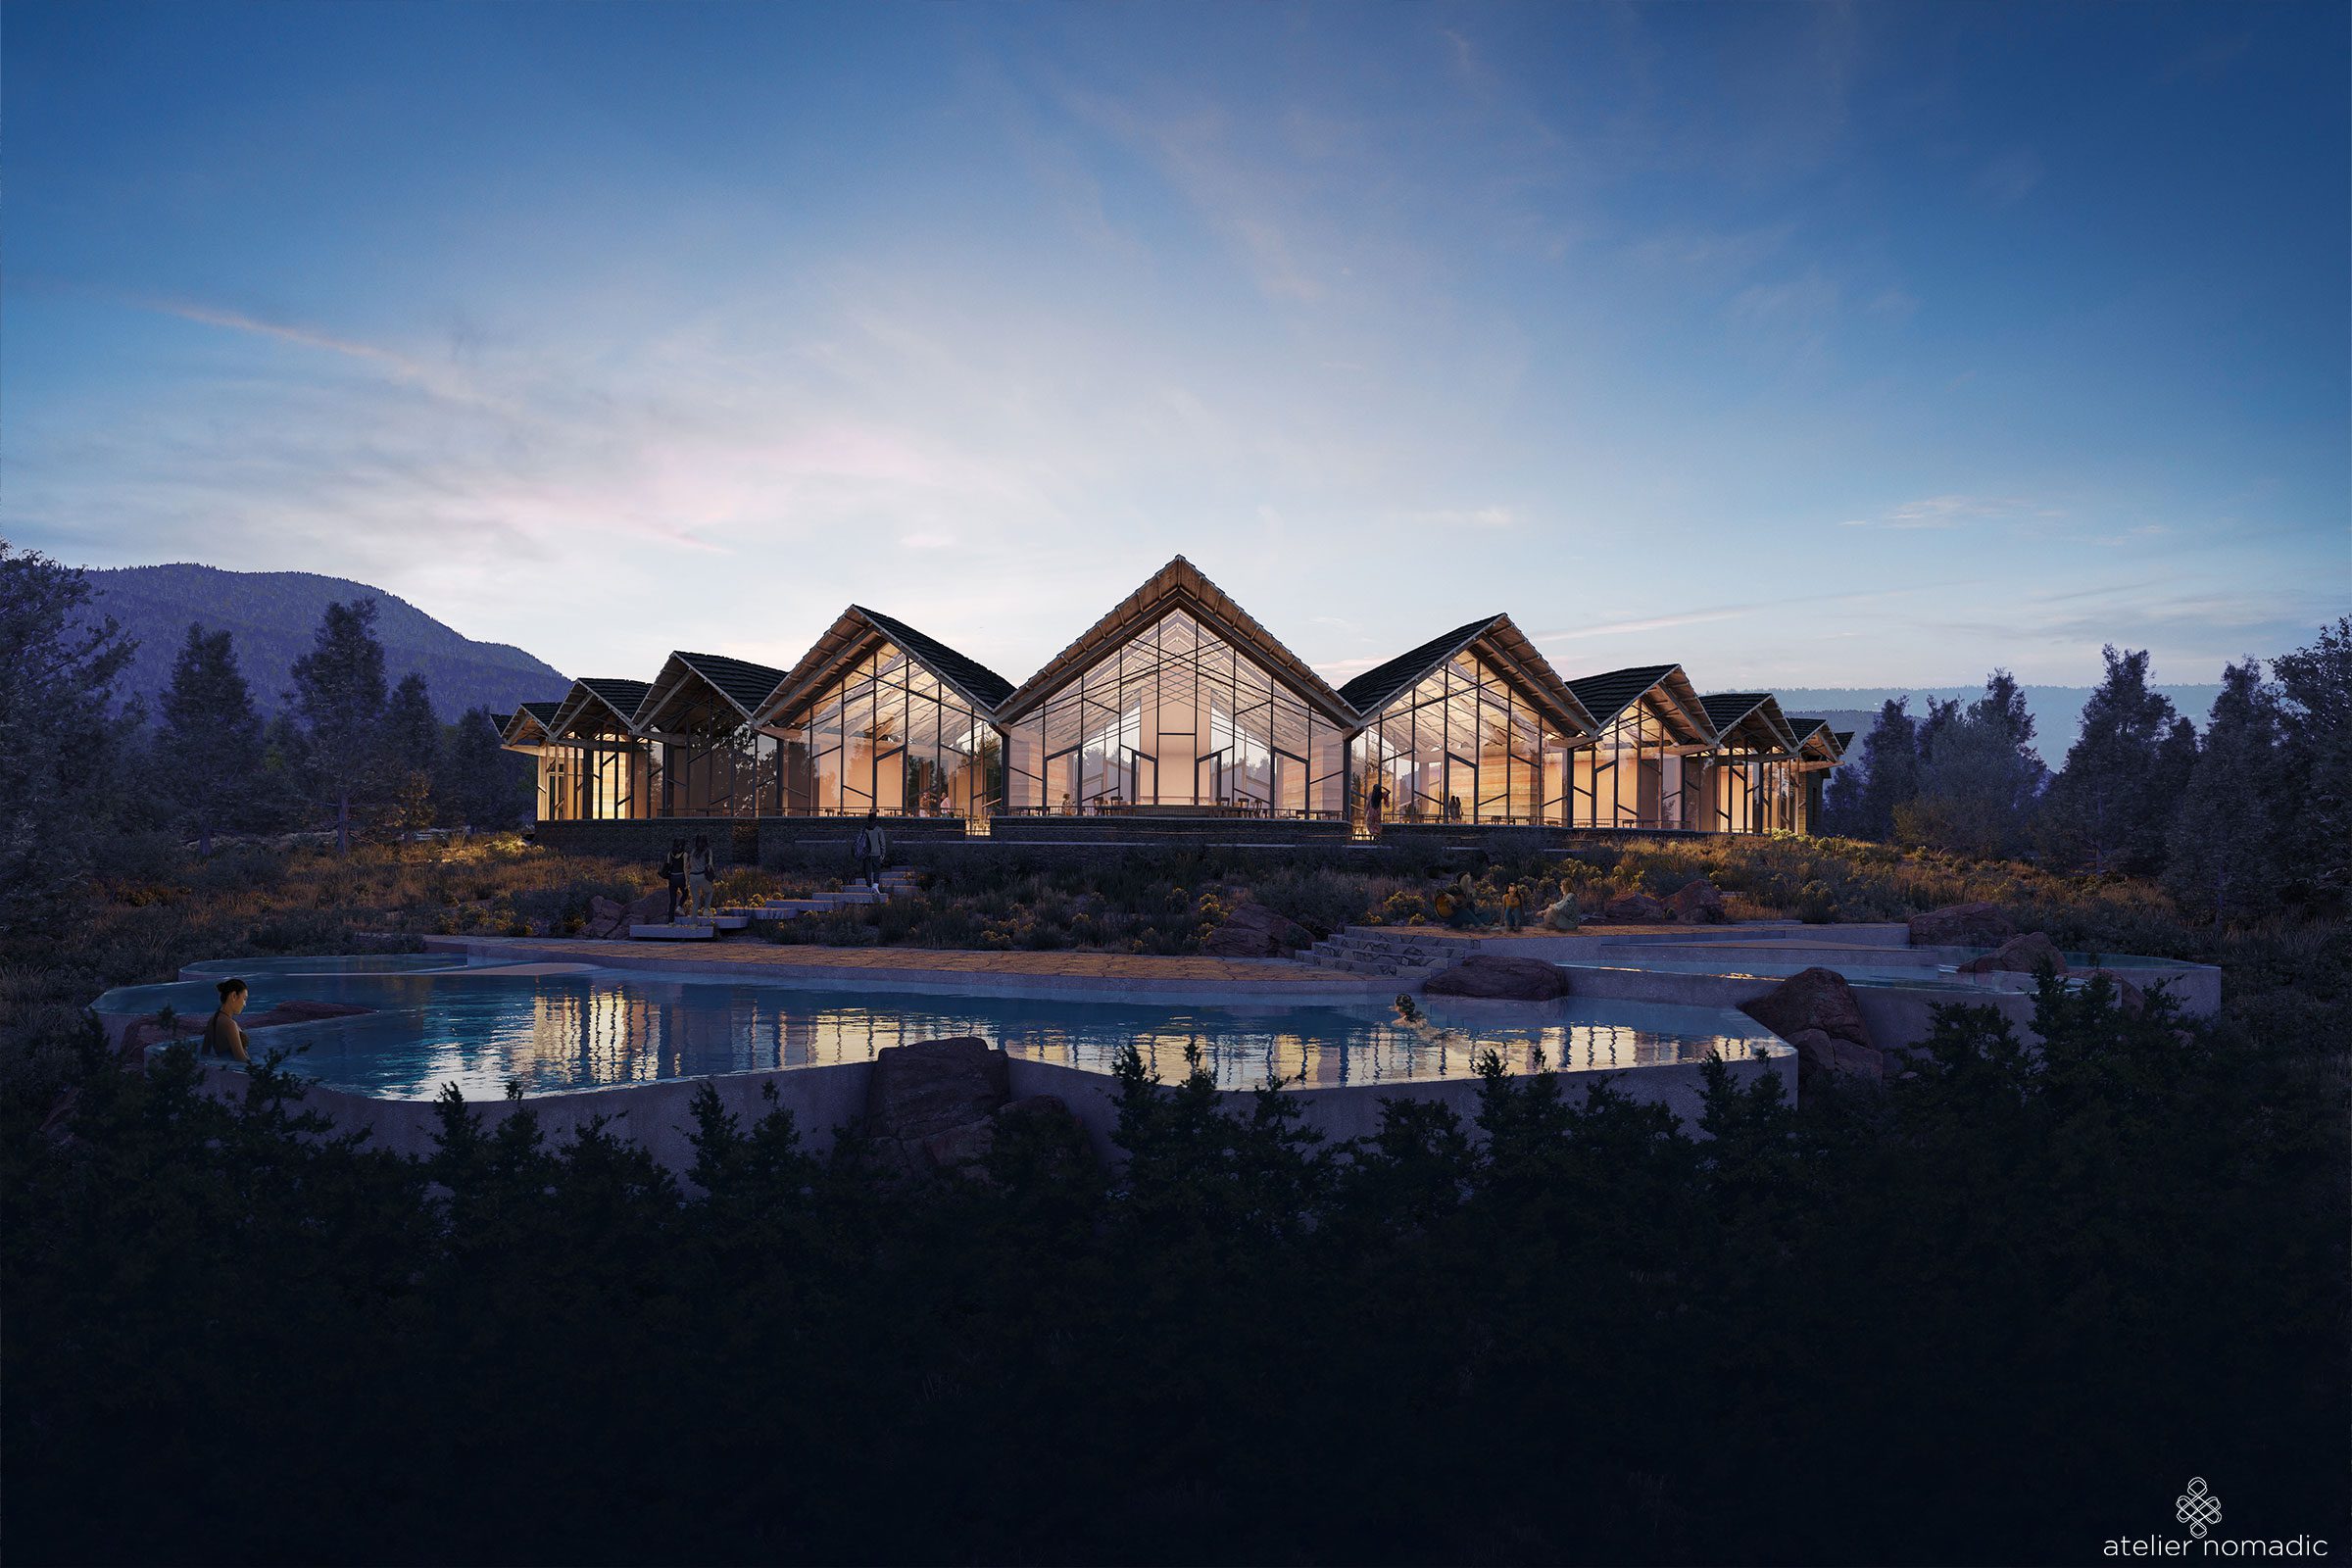 Covering 1,110 acres, just a mile from the edge of the national park in Utah, the luxury wilderness retreat will allow guests to stay in one of its 40 suites or homesteads.